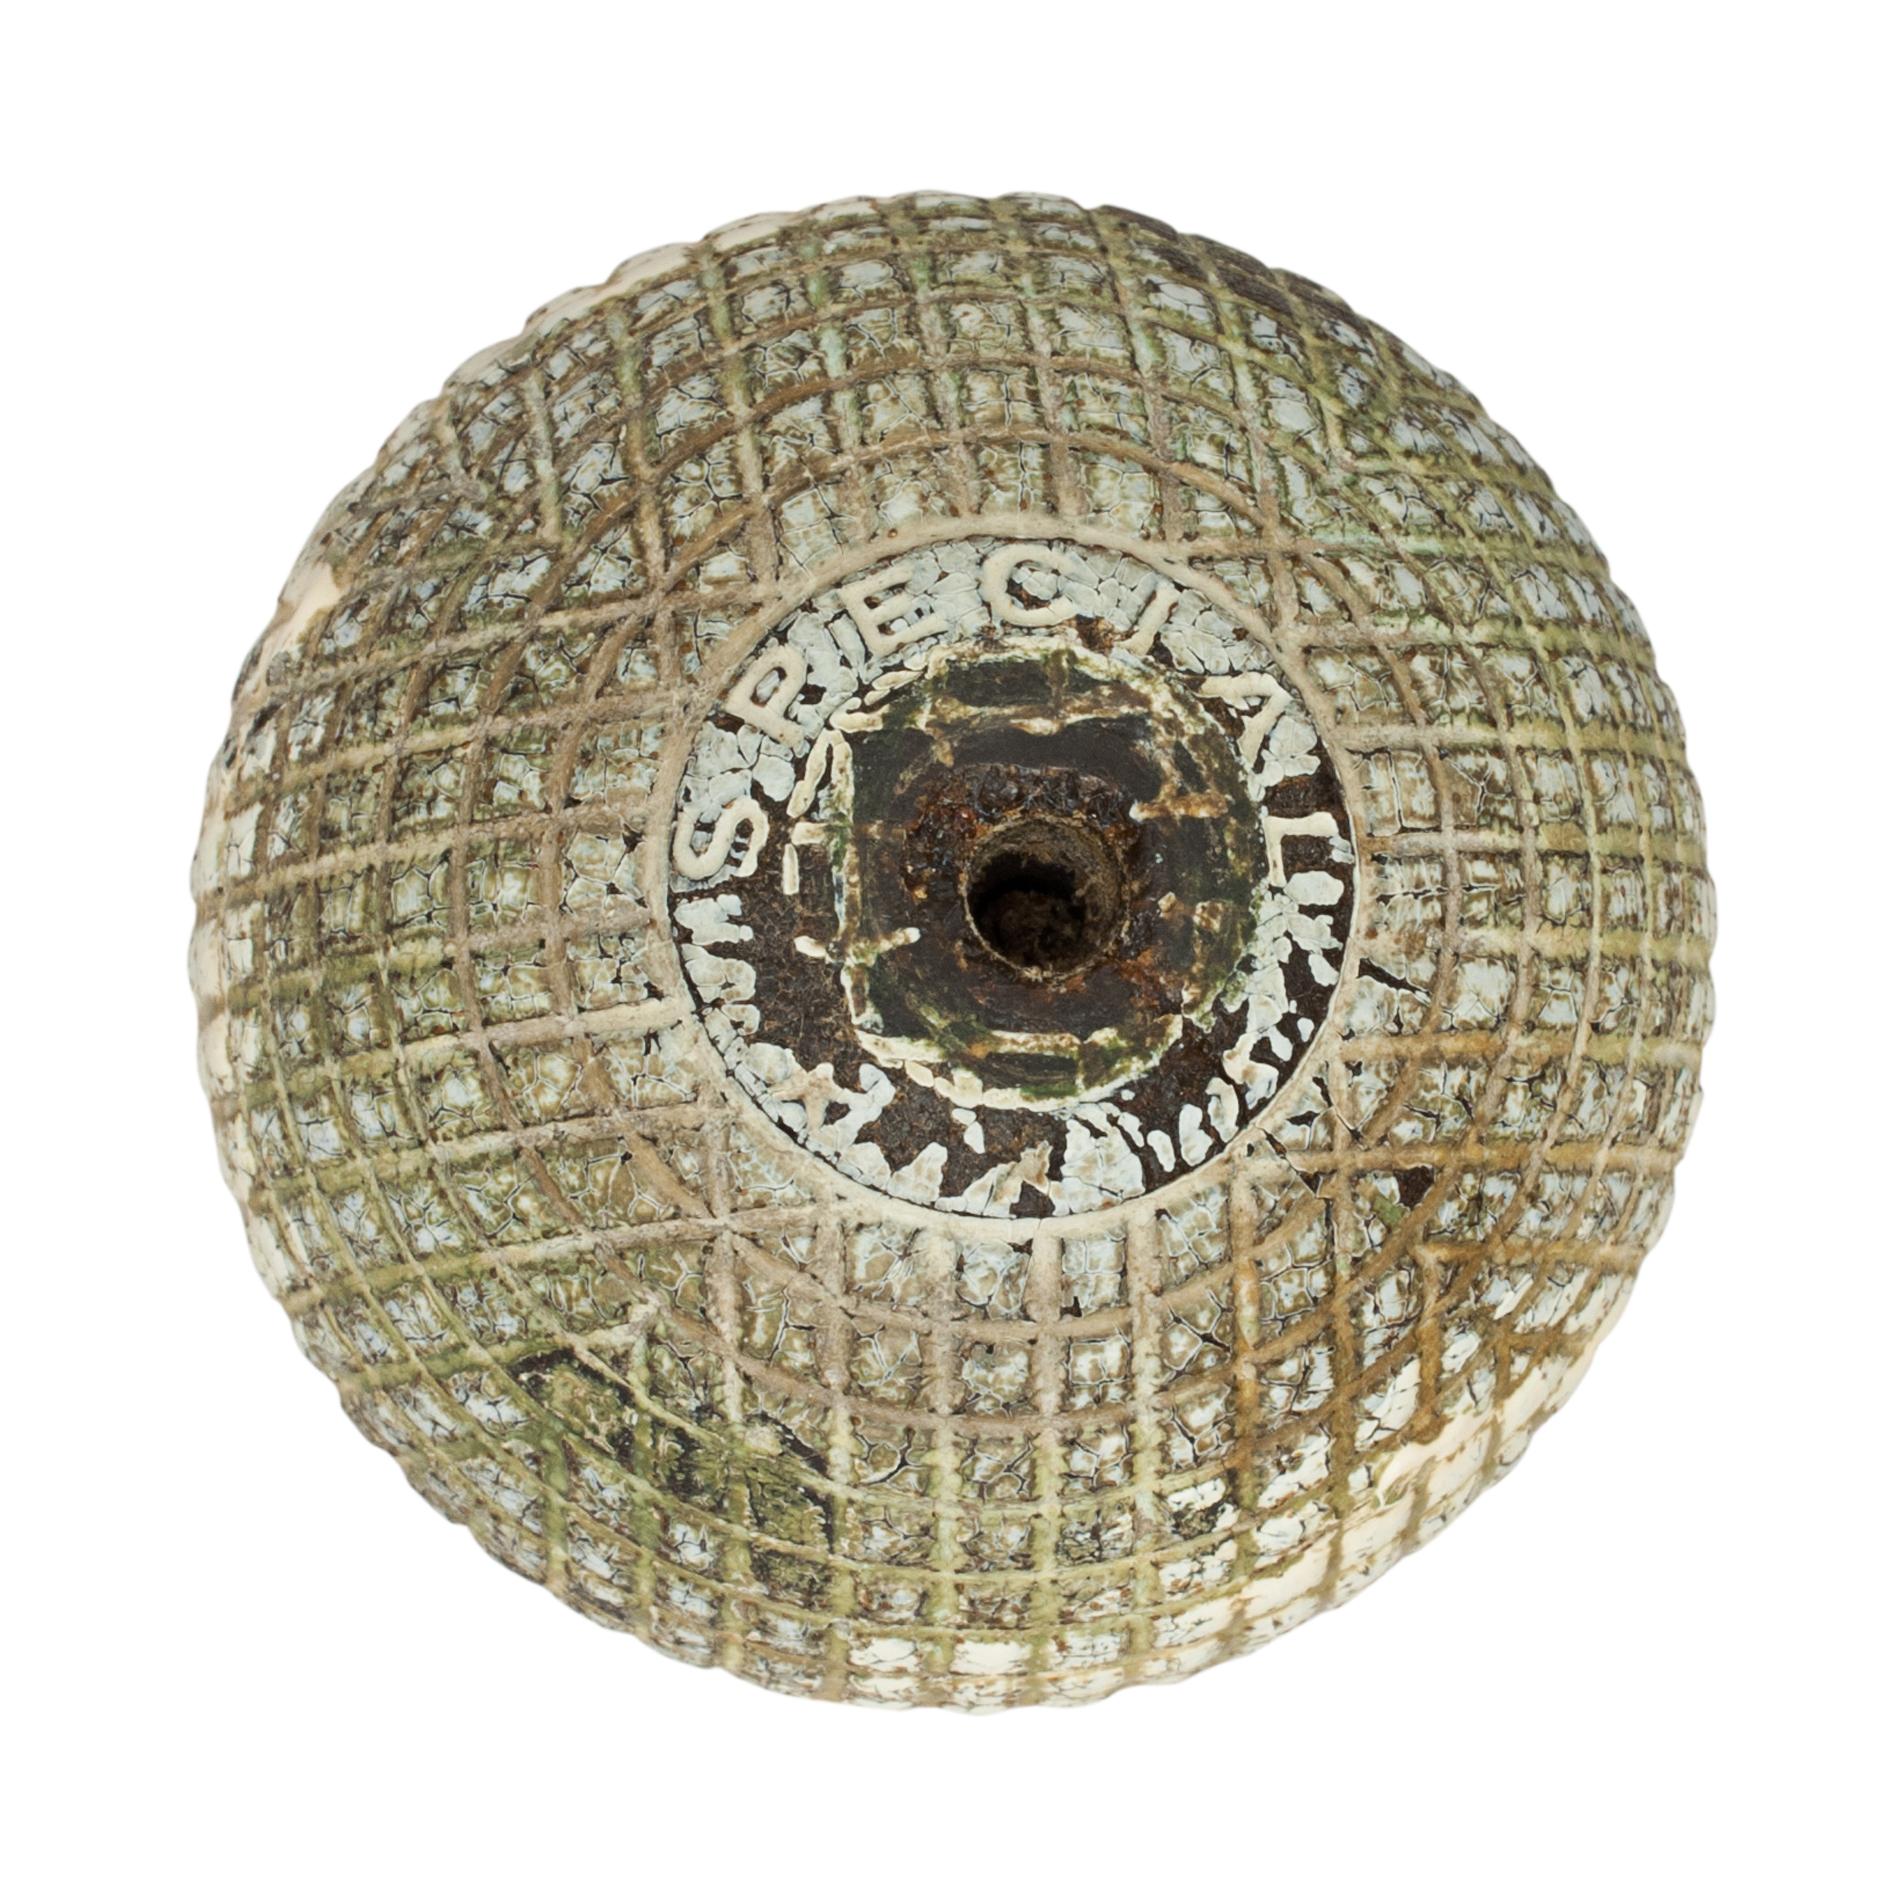 Gutta Percha Golf Ball, G. McHardy Special.
A moulded mesh patterned white Gutta Percha golf ball in original condition manufactured by G. McHardy. The 1890's Gutty ball has had a hole drilled into the bottom so may have been mounted on a trophy at